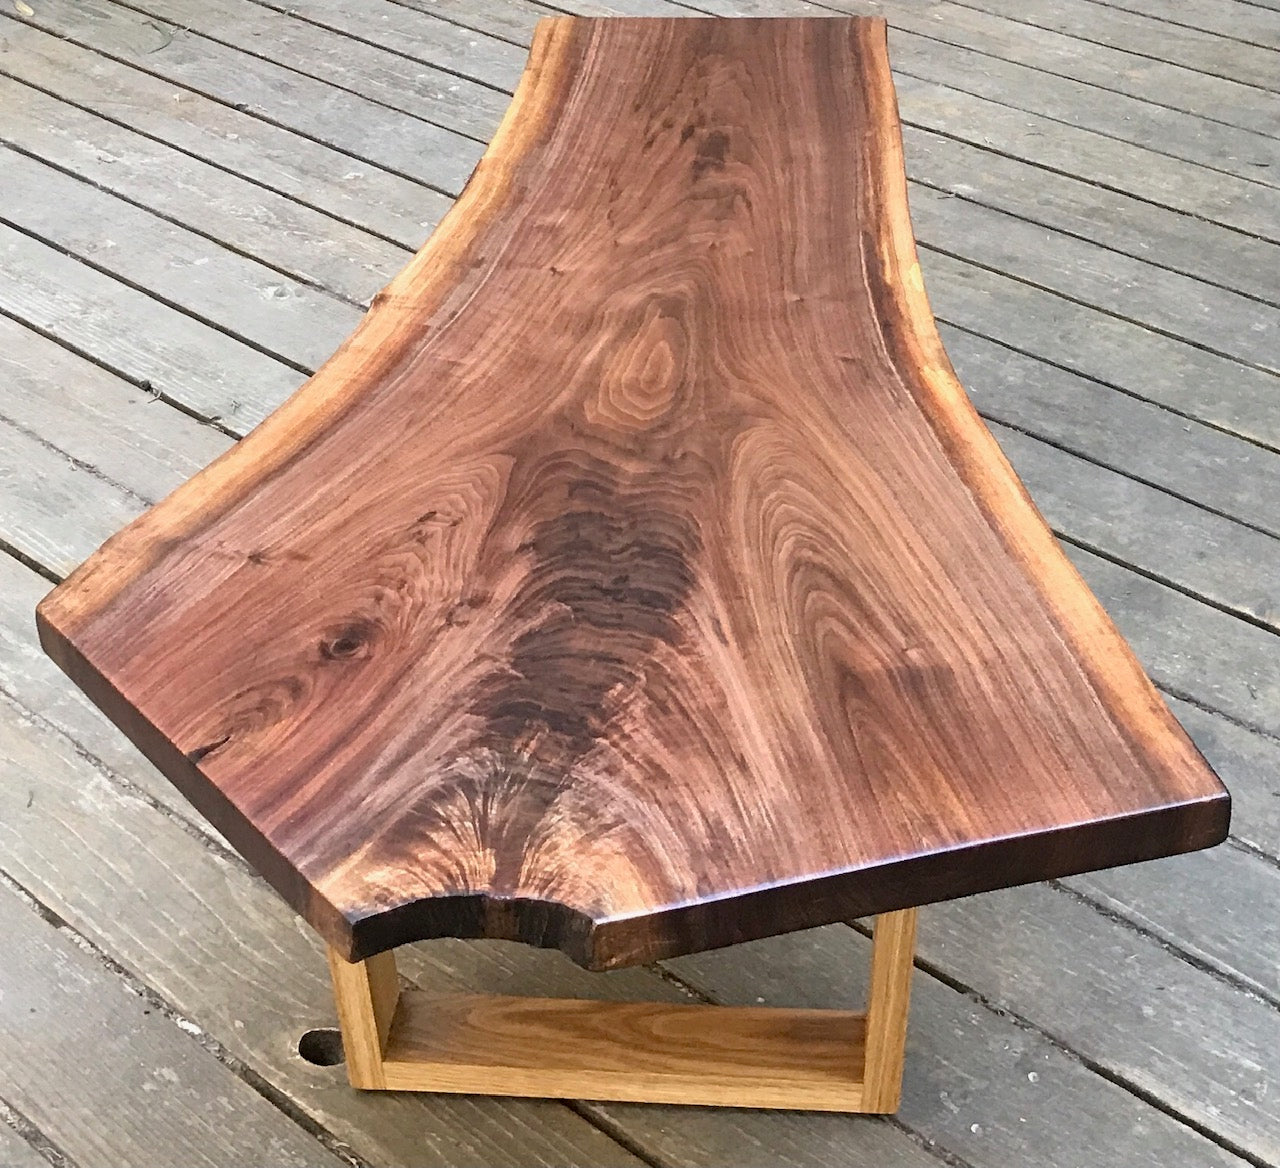 Live Edge Coffee Table-Walnut with Natural White Oak Base